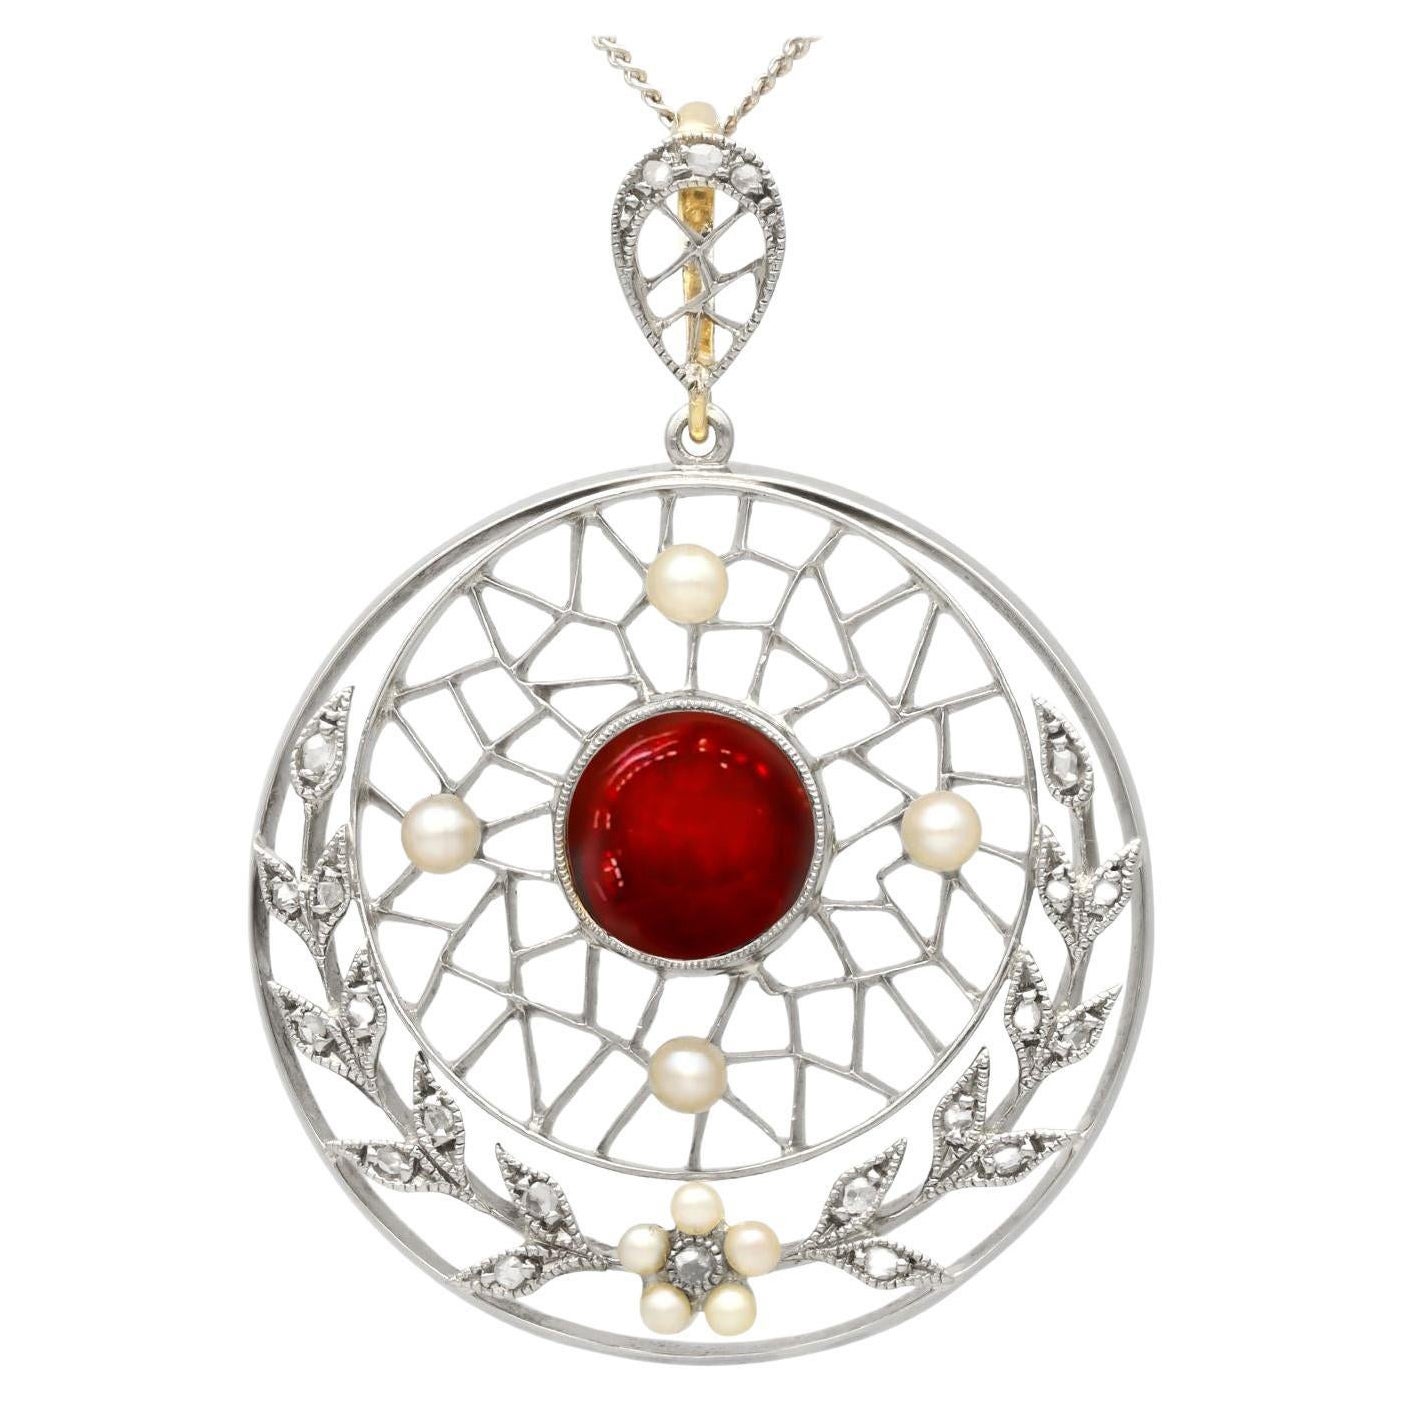 Antique 1.74ct Garnet and Diamond, Pearl and Yellow Gold Pendant, circa 1900